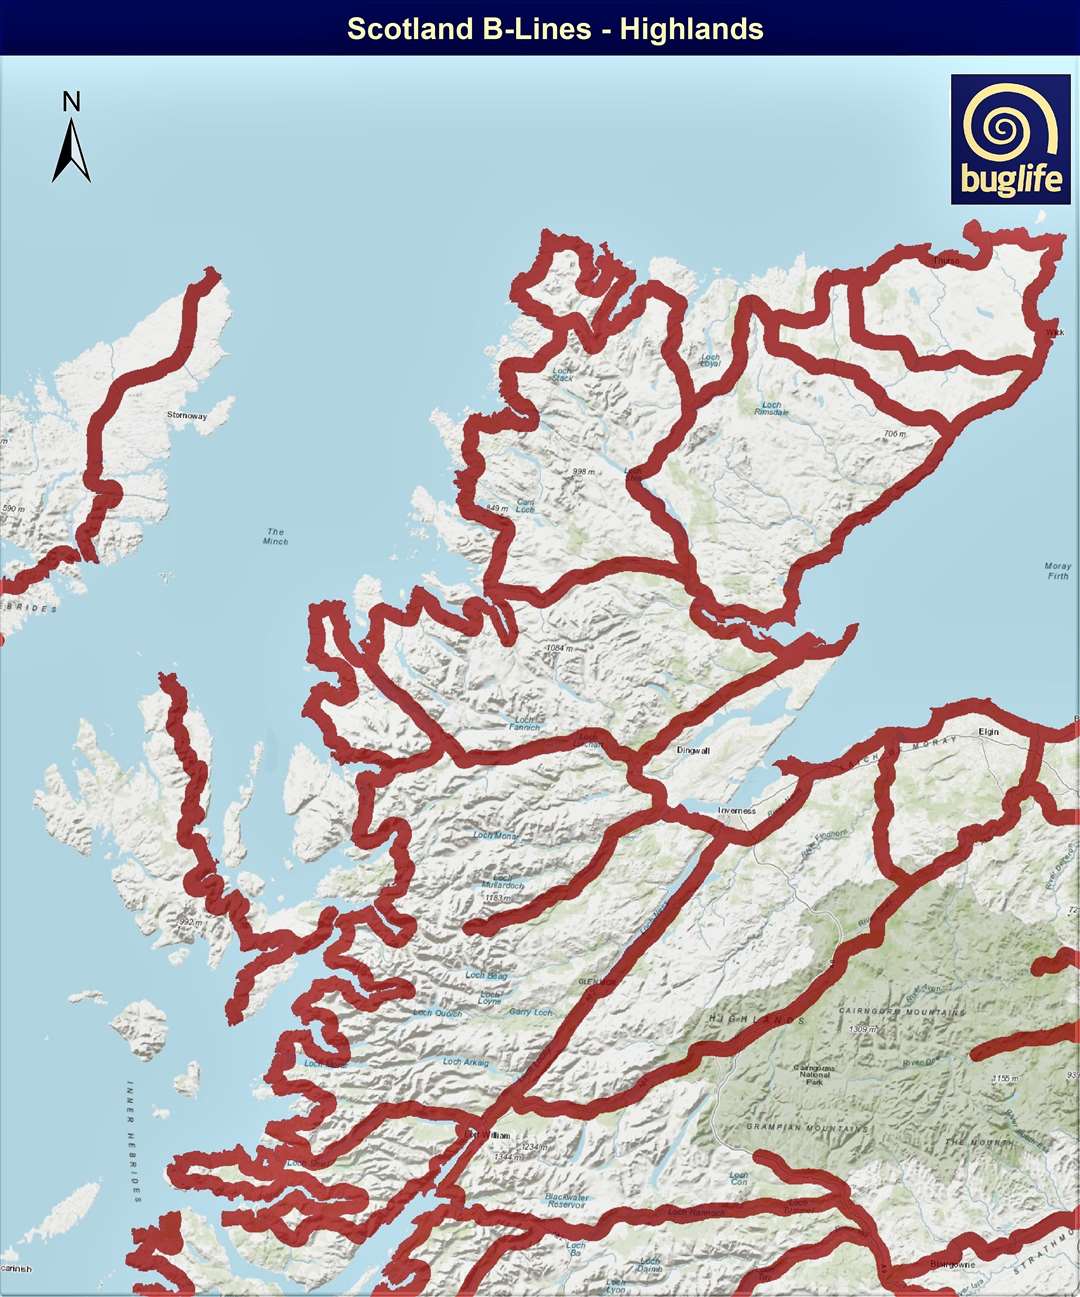 B-Lines map of Scotland showing insect routes.